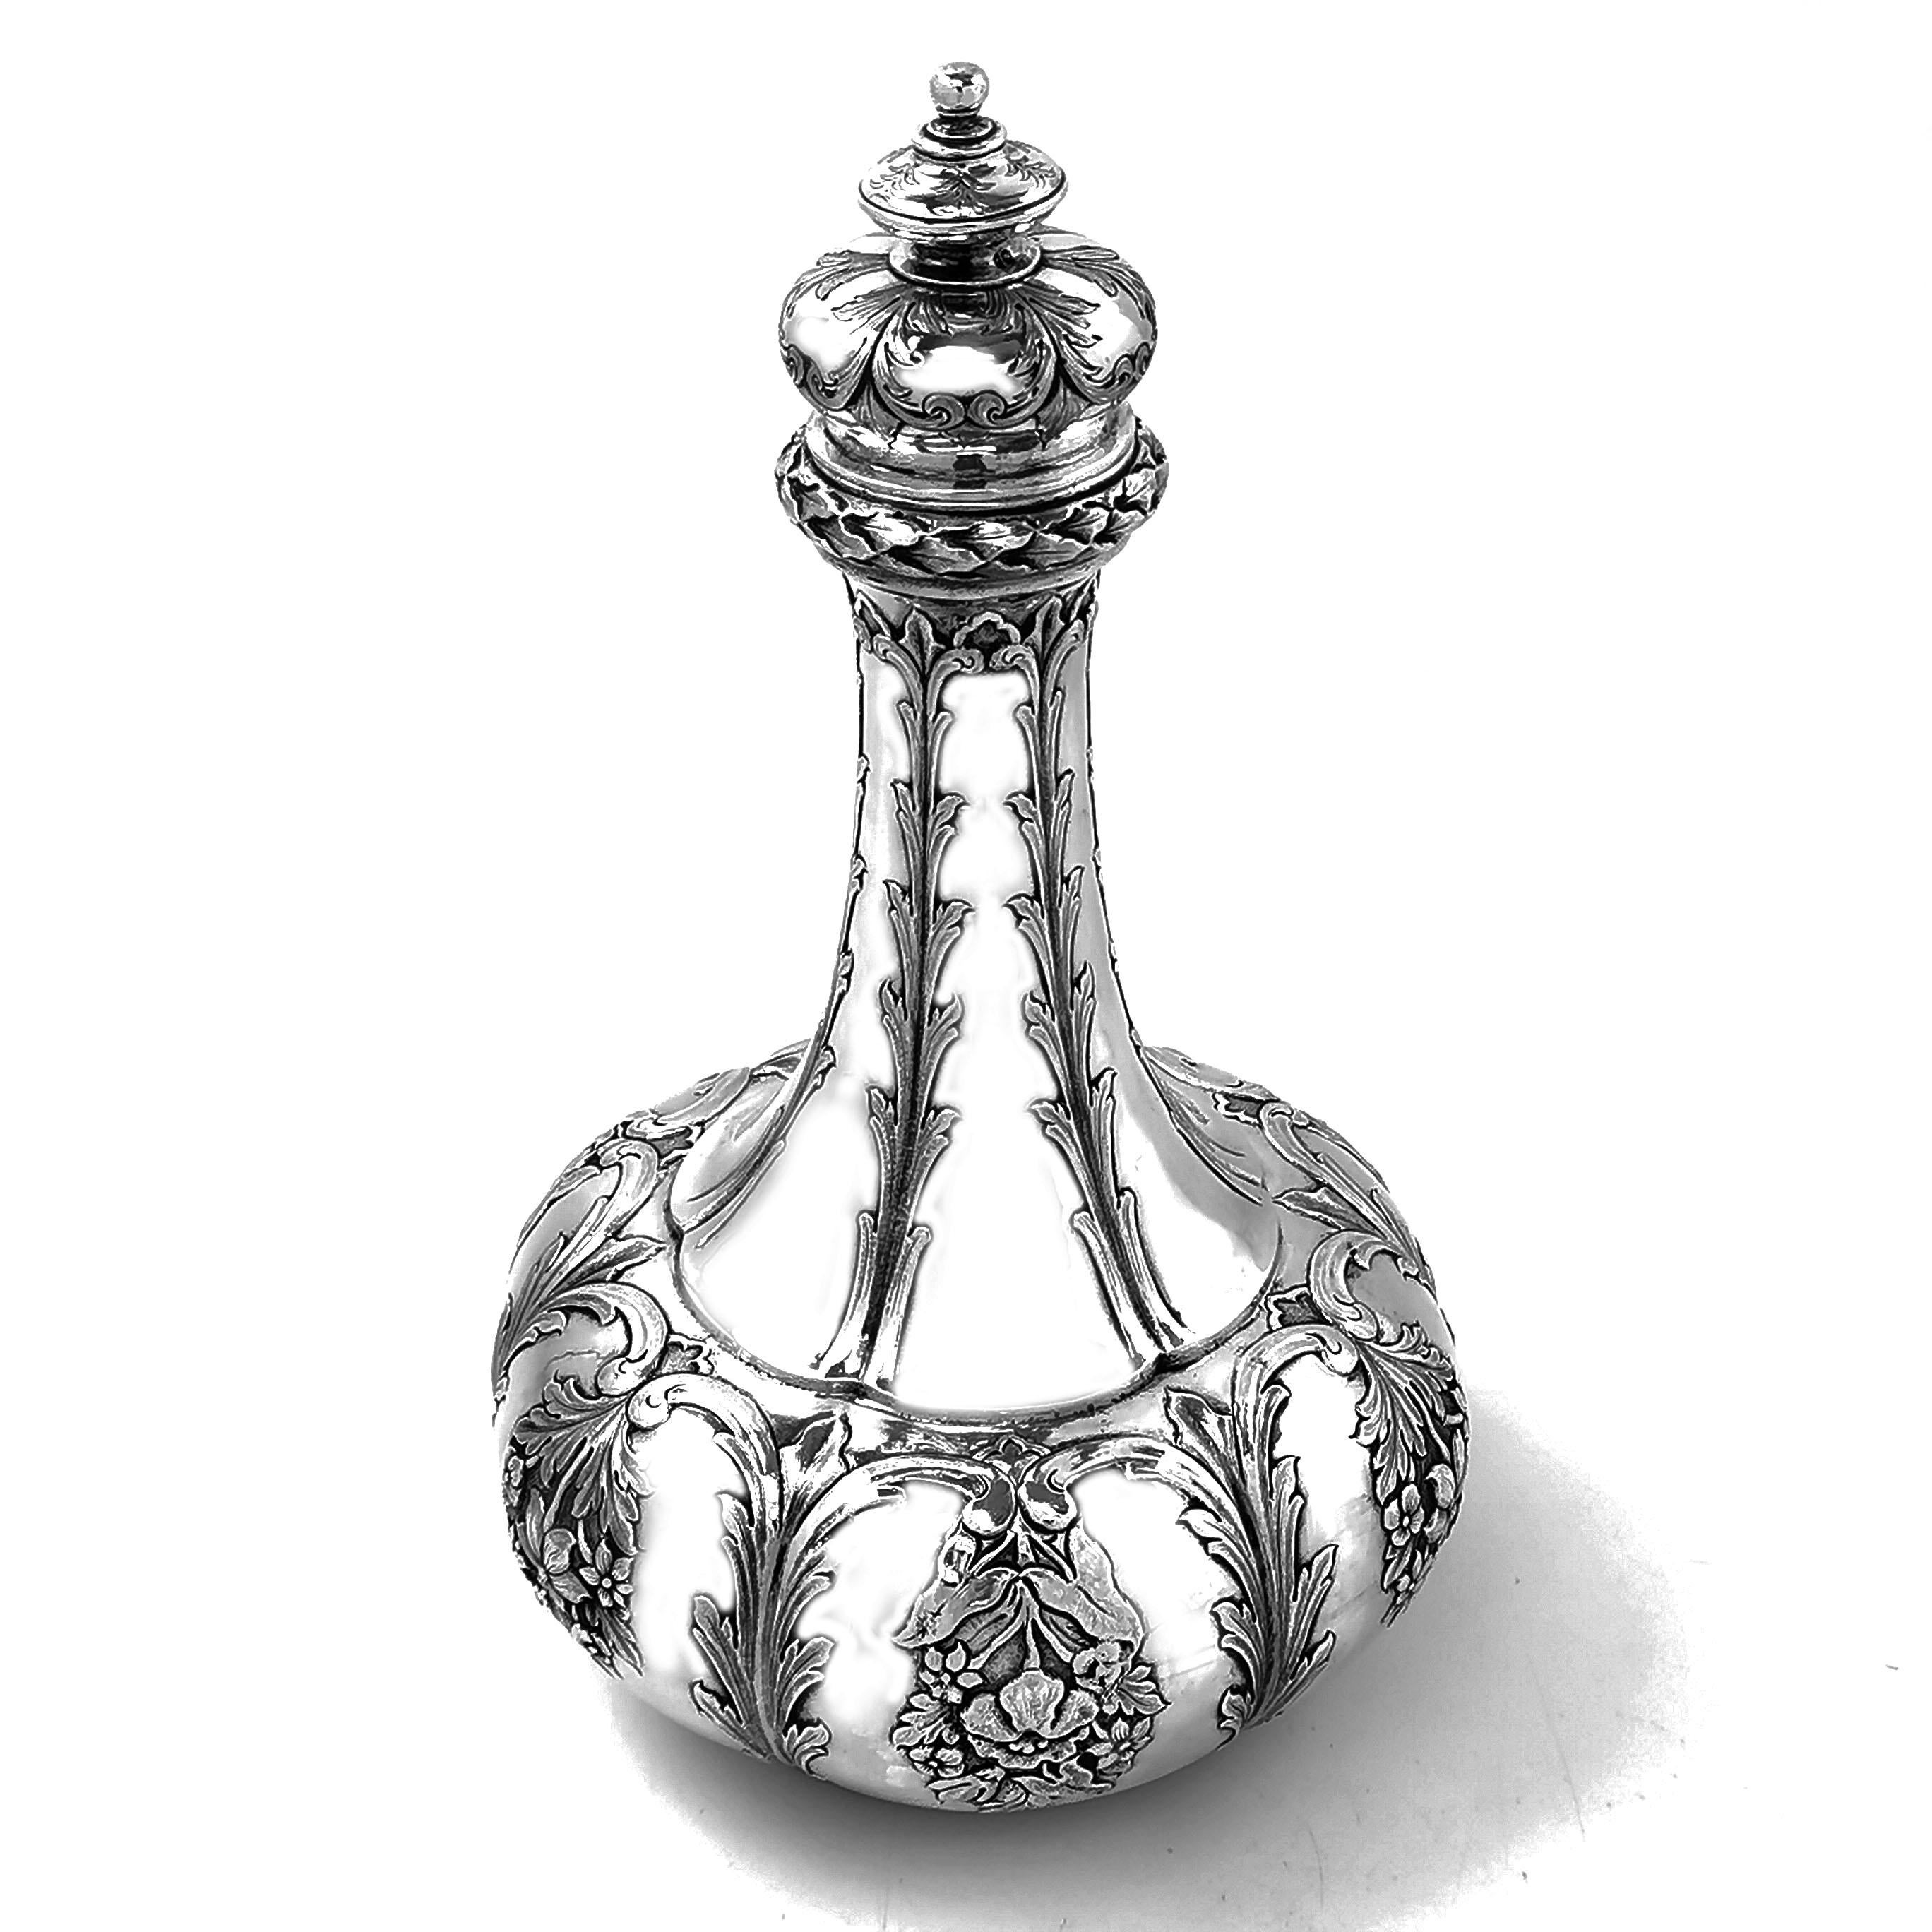 A beautiful Antique Indian Sterling Silver Decanter with a subtle lobed design embellished with delicate floral chased designs. The engraving on the Decanter reads -
Presented to Mess of the Royal Sussex Light Infantry Militia by Major The Honble H.